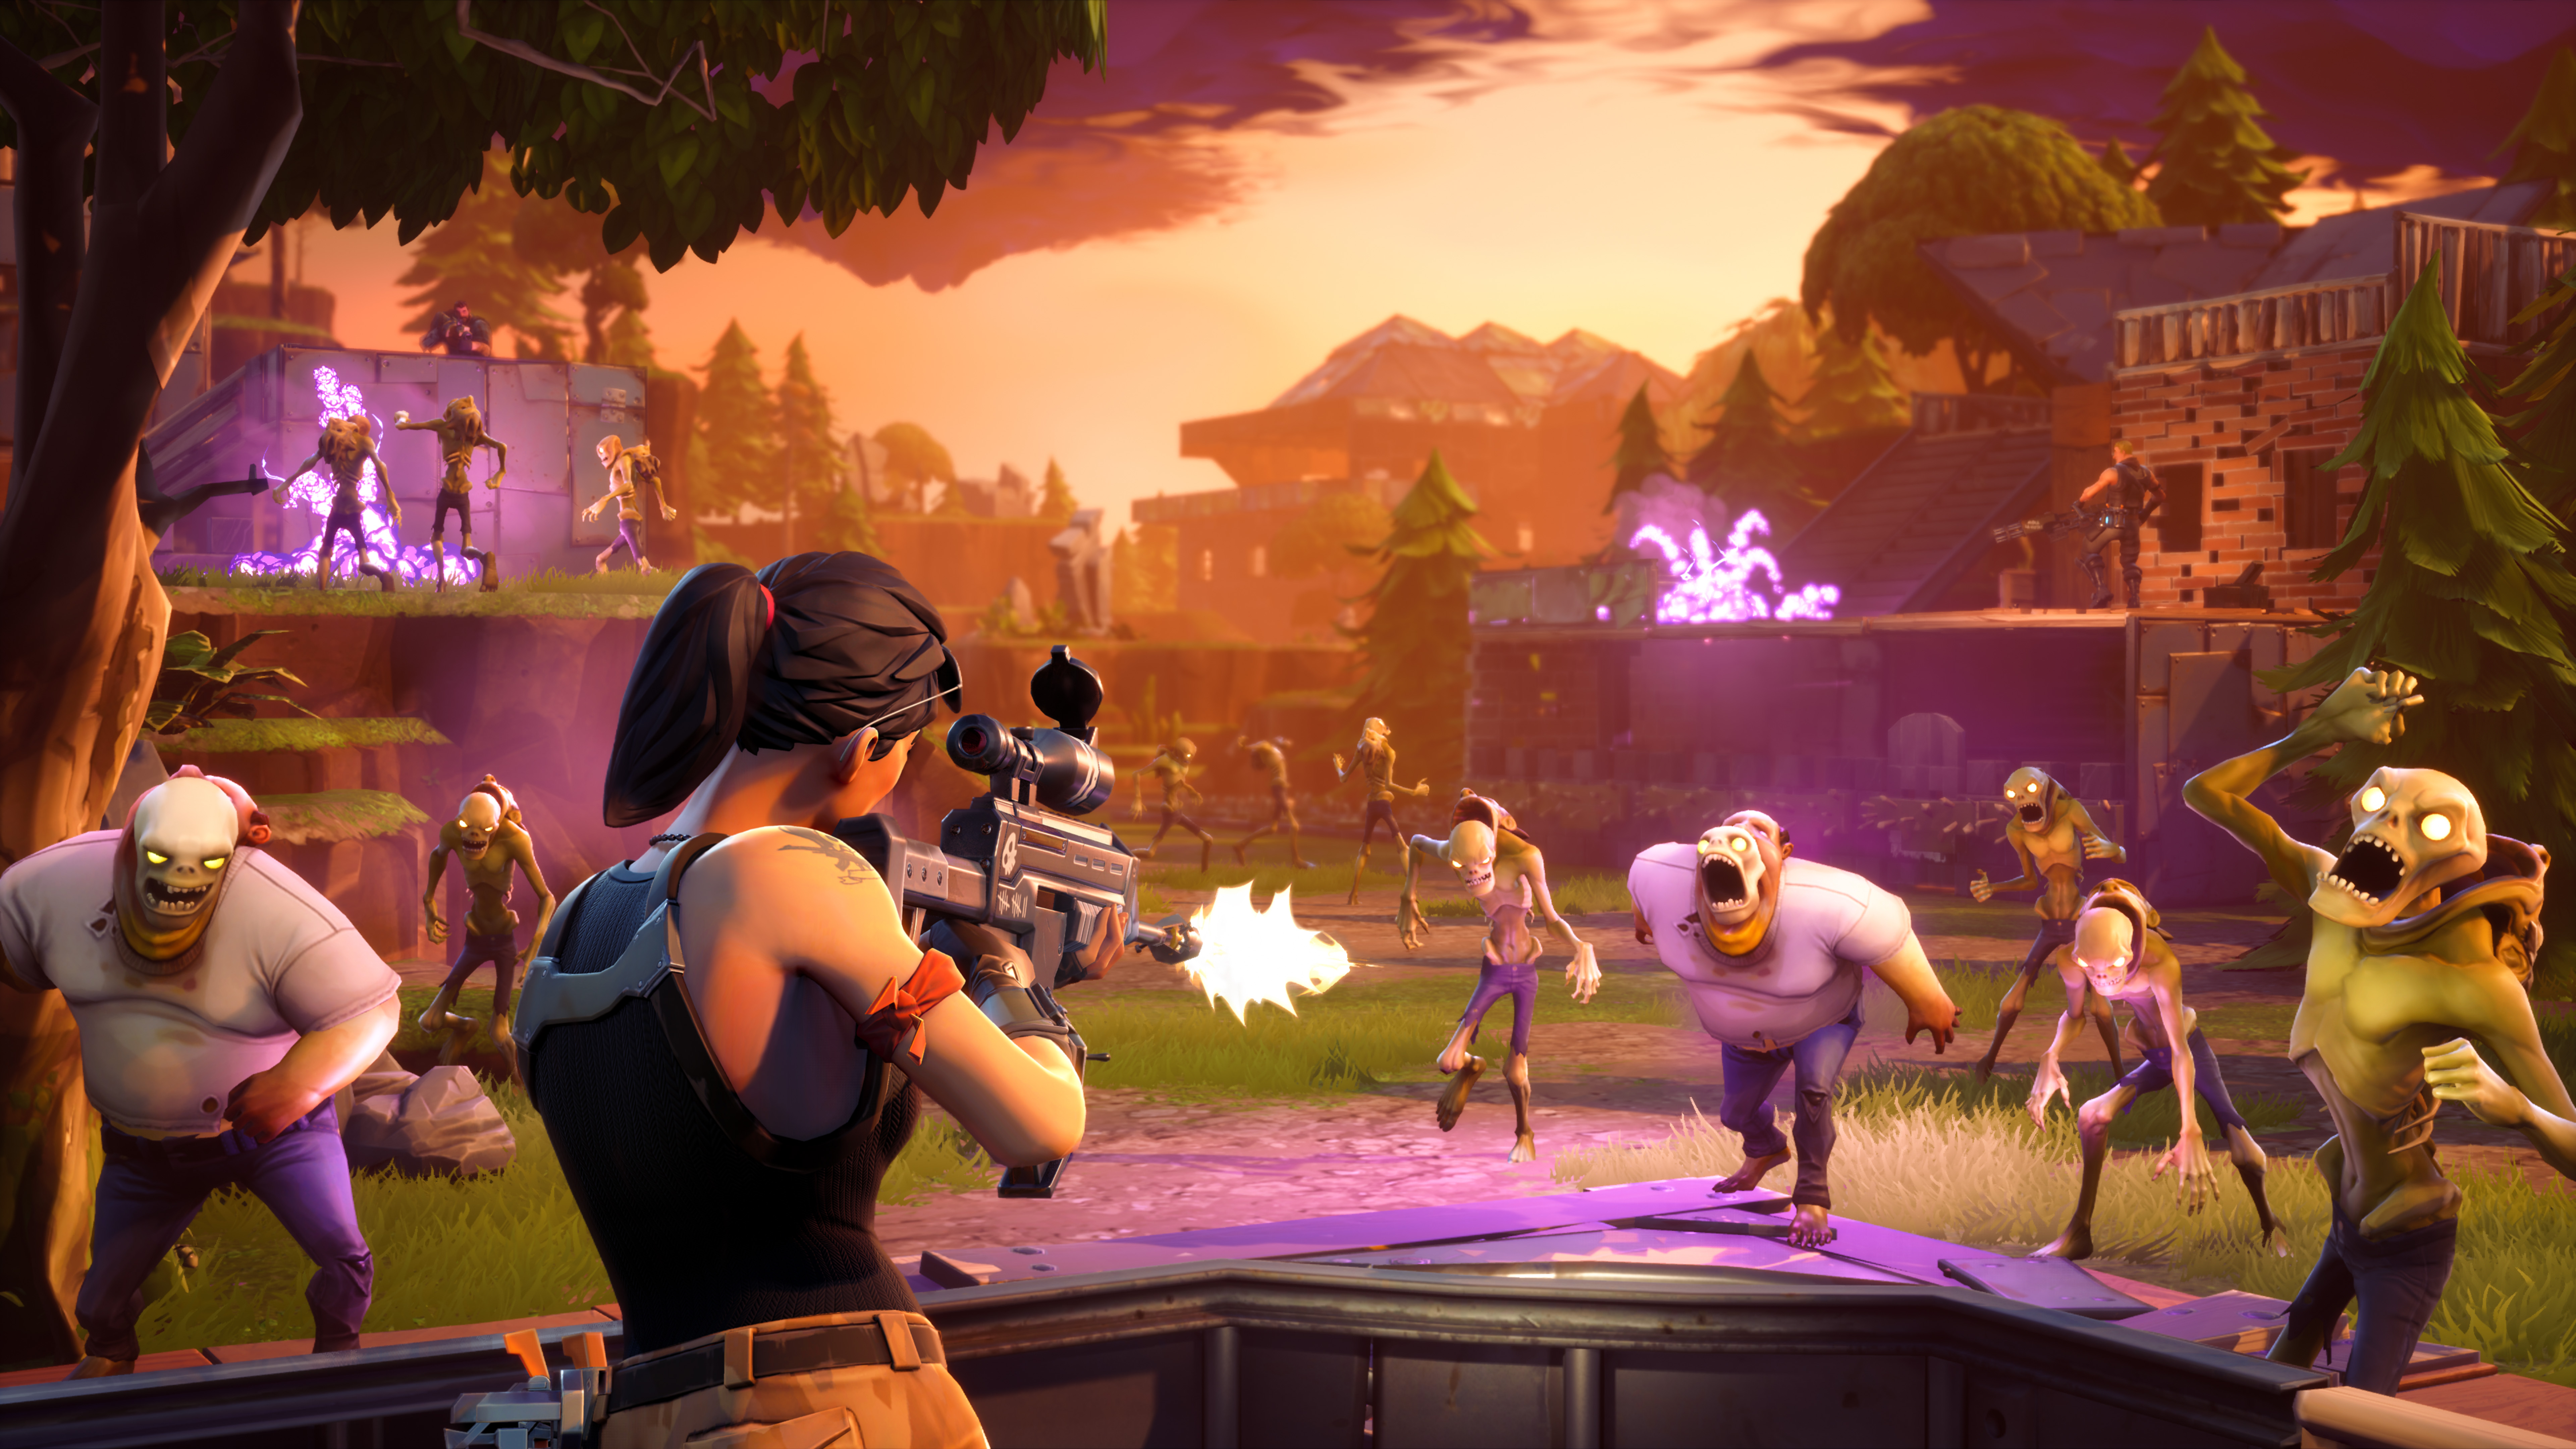 Fortnite Poisons A Potentially Great Game With Agonizing F2p Limits - enlarge at its best fortnite looks and feels like this nicely staged promo pic of in game action however so many free to play annoyances drag this